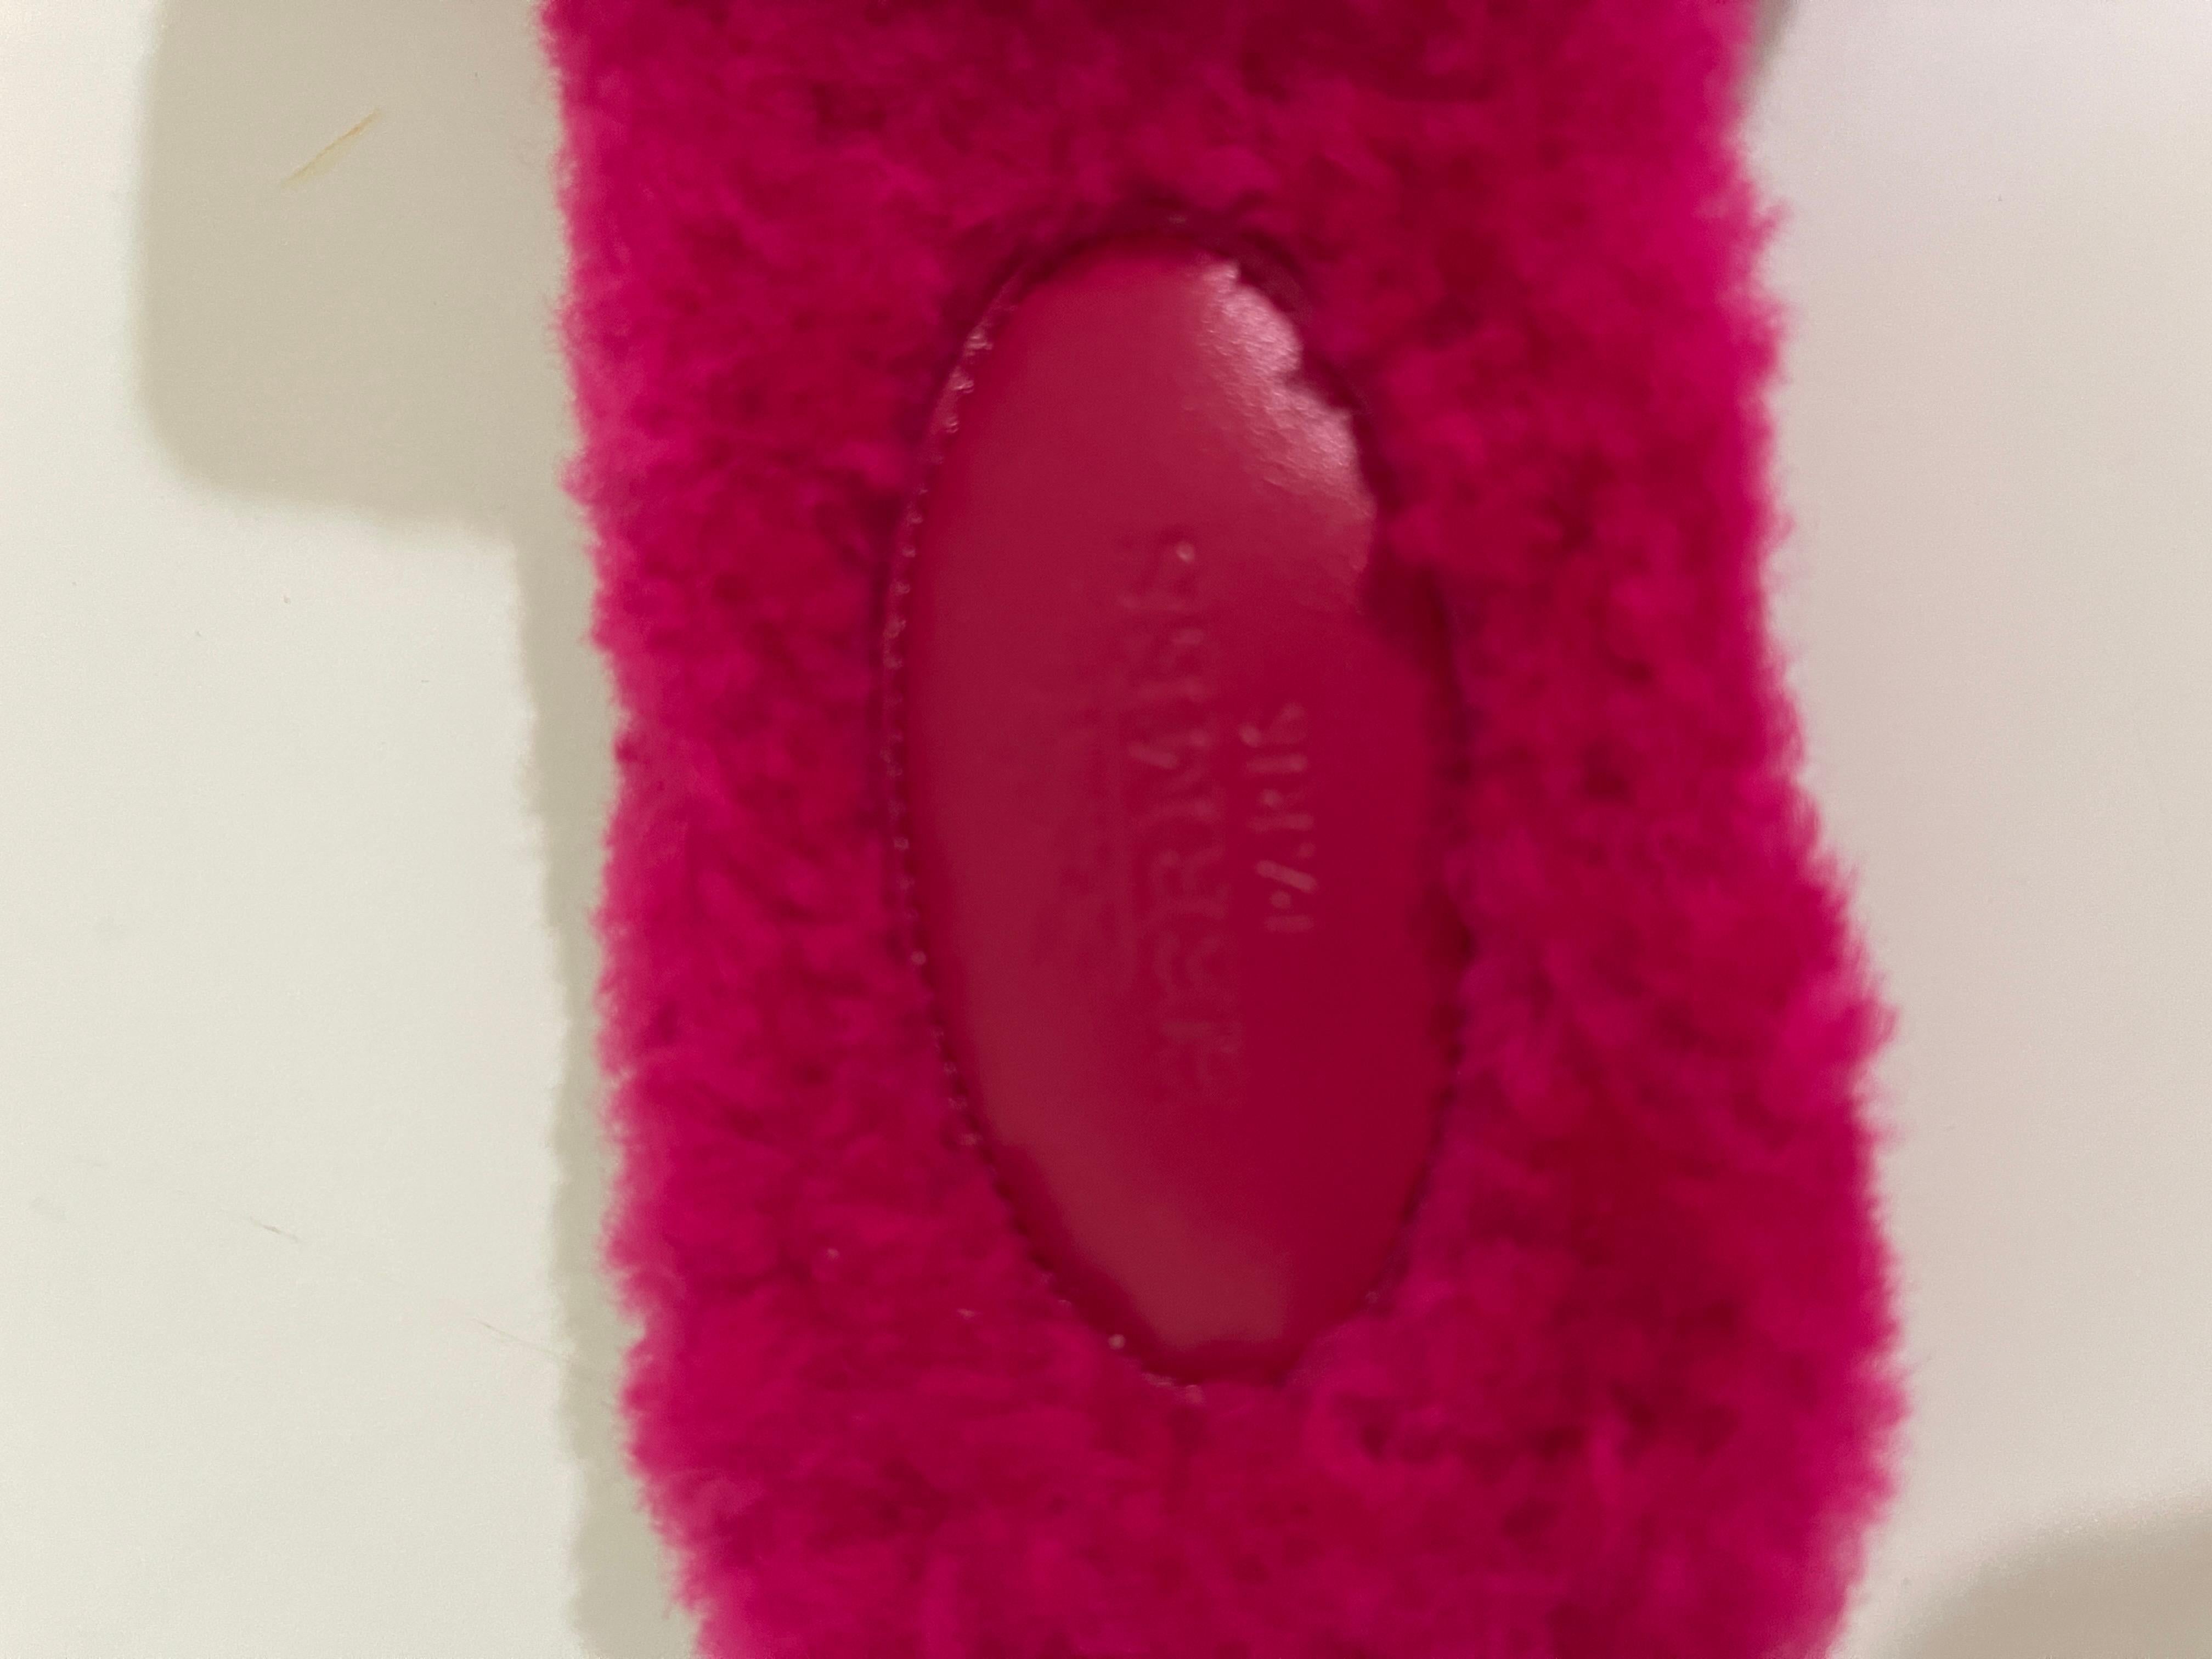 The  Oran Sandal Slipper
So soft and comfy
SOLDOUT
Hot Pink
Fuchsia
SIZE 37.5

 
Sandal in woolskin with iconic 